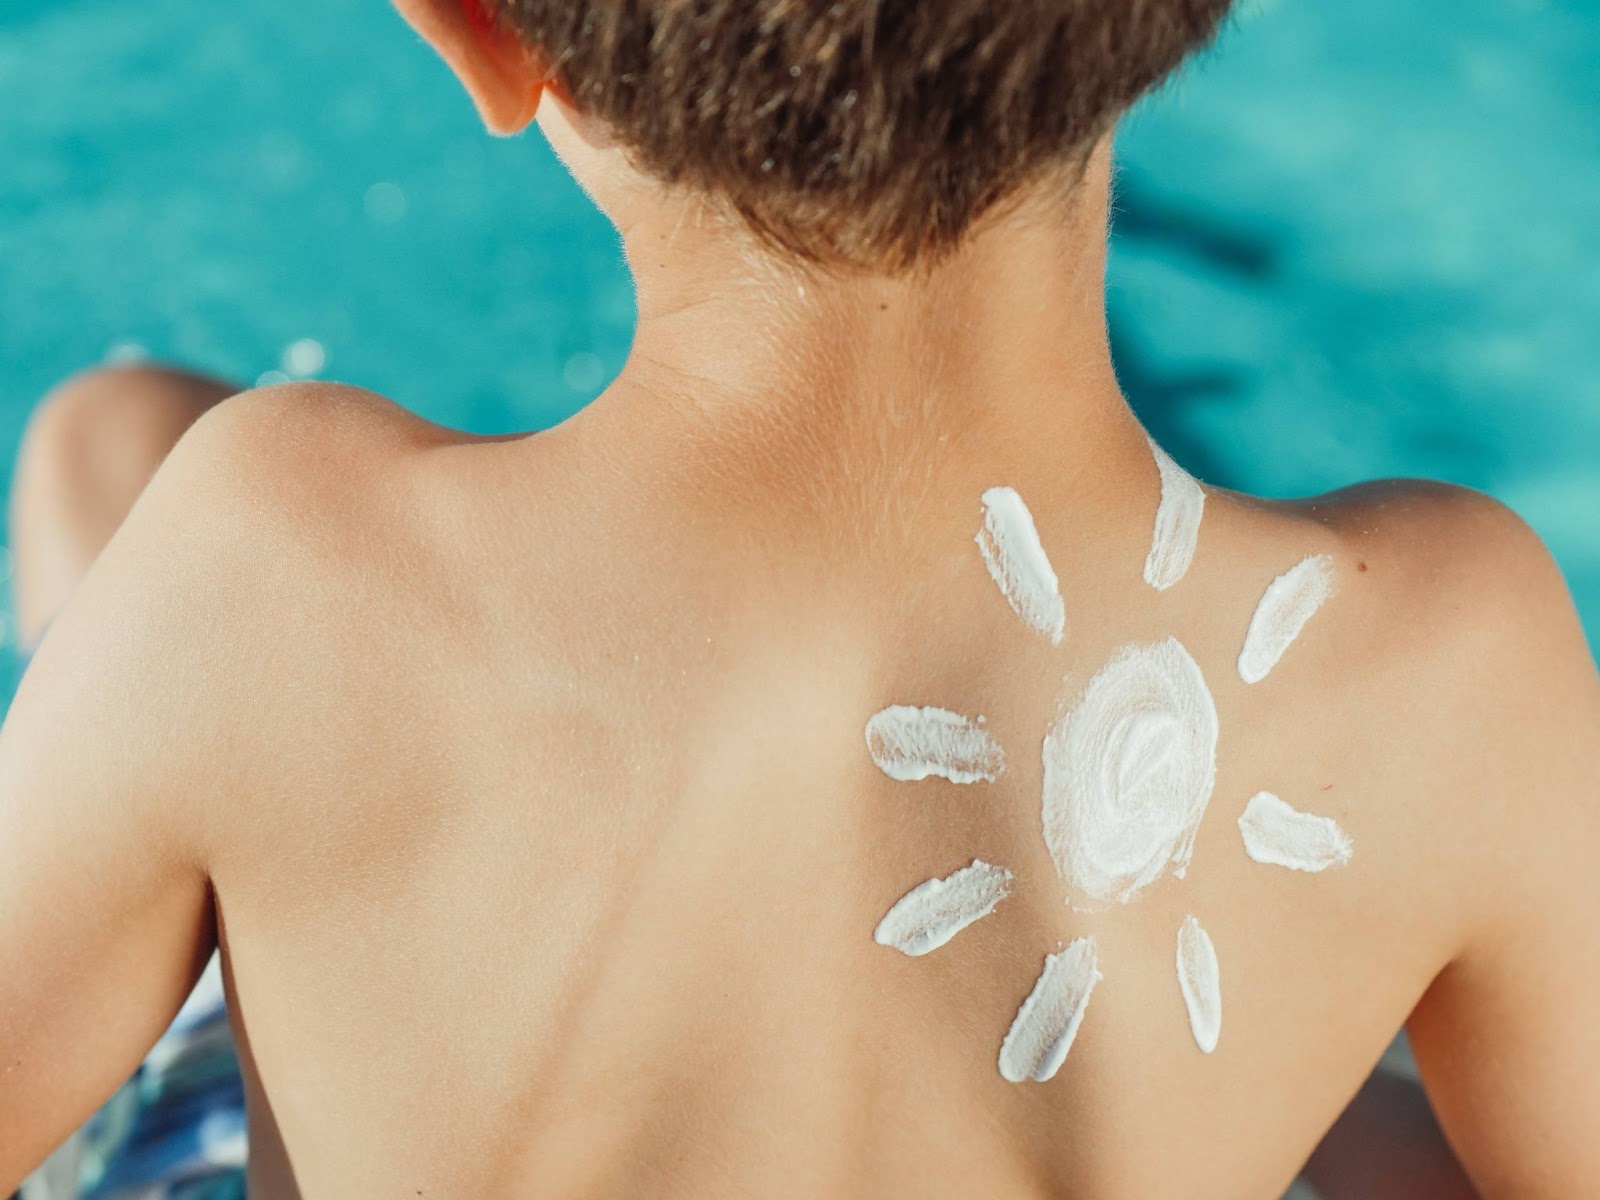 why is sunscreen important